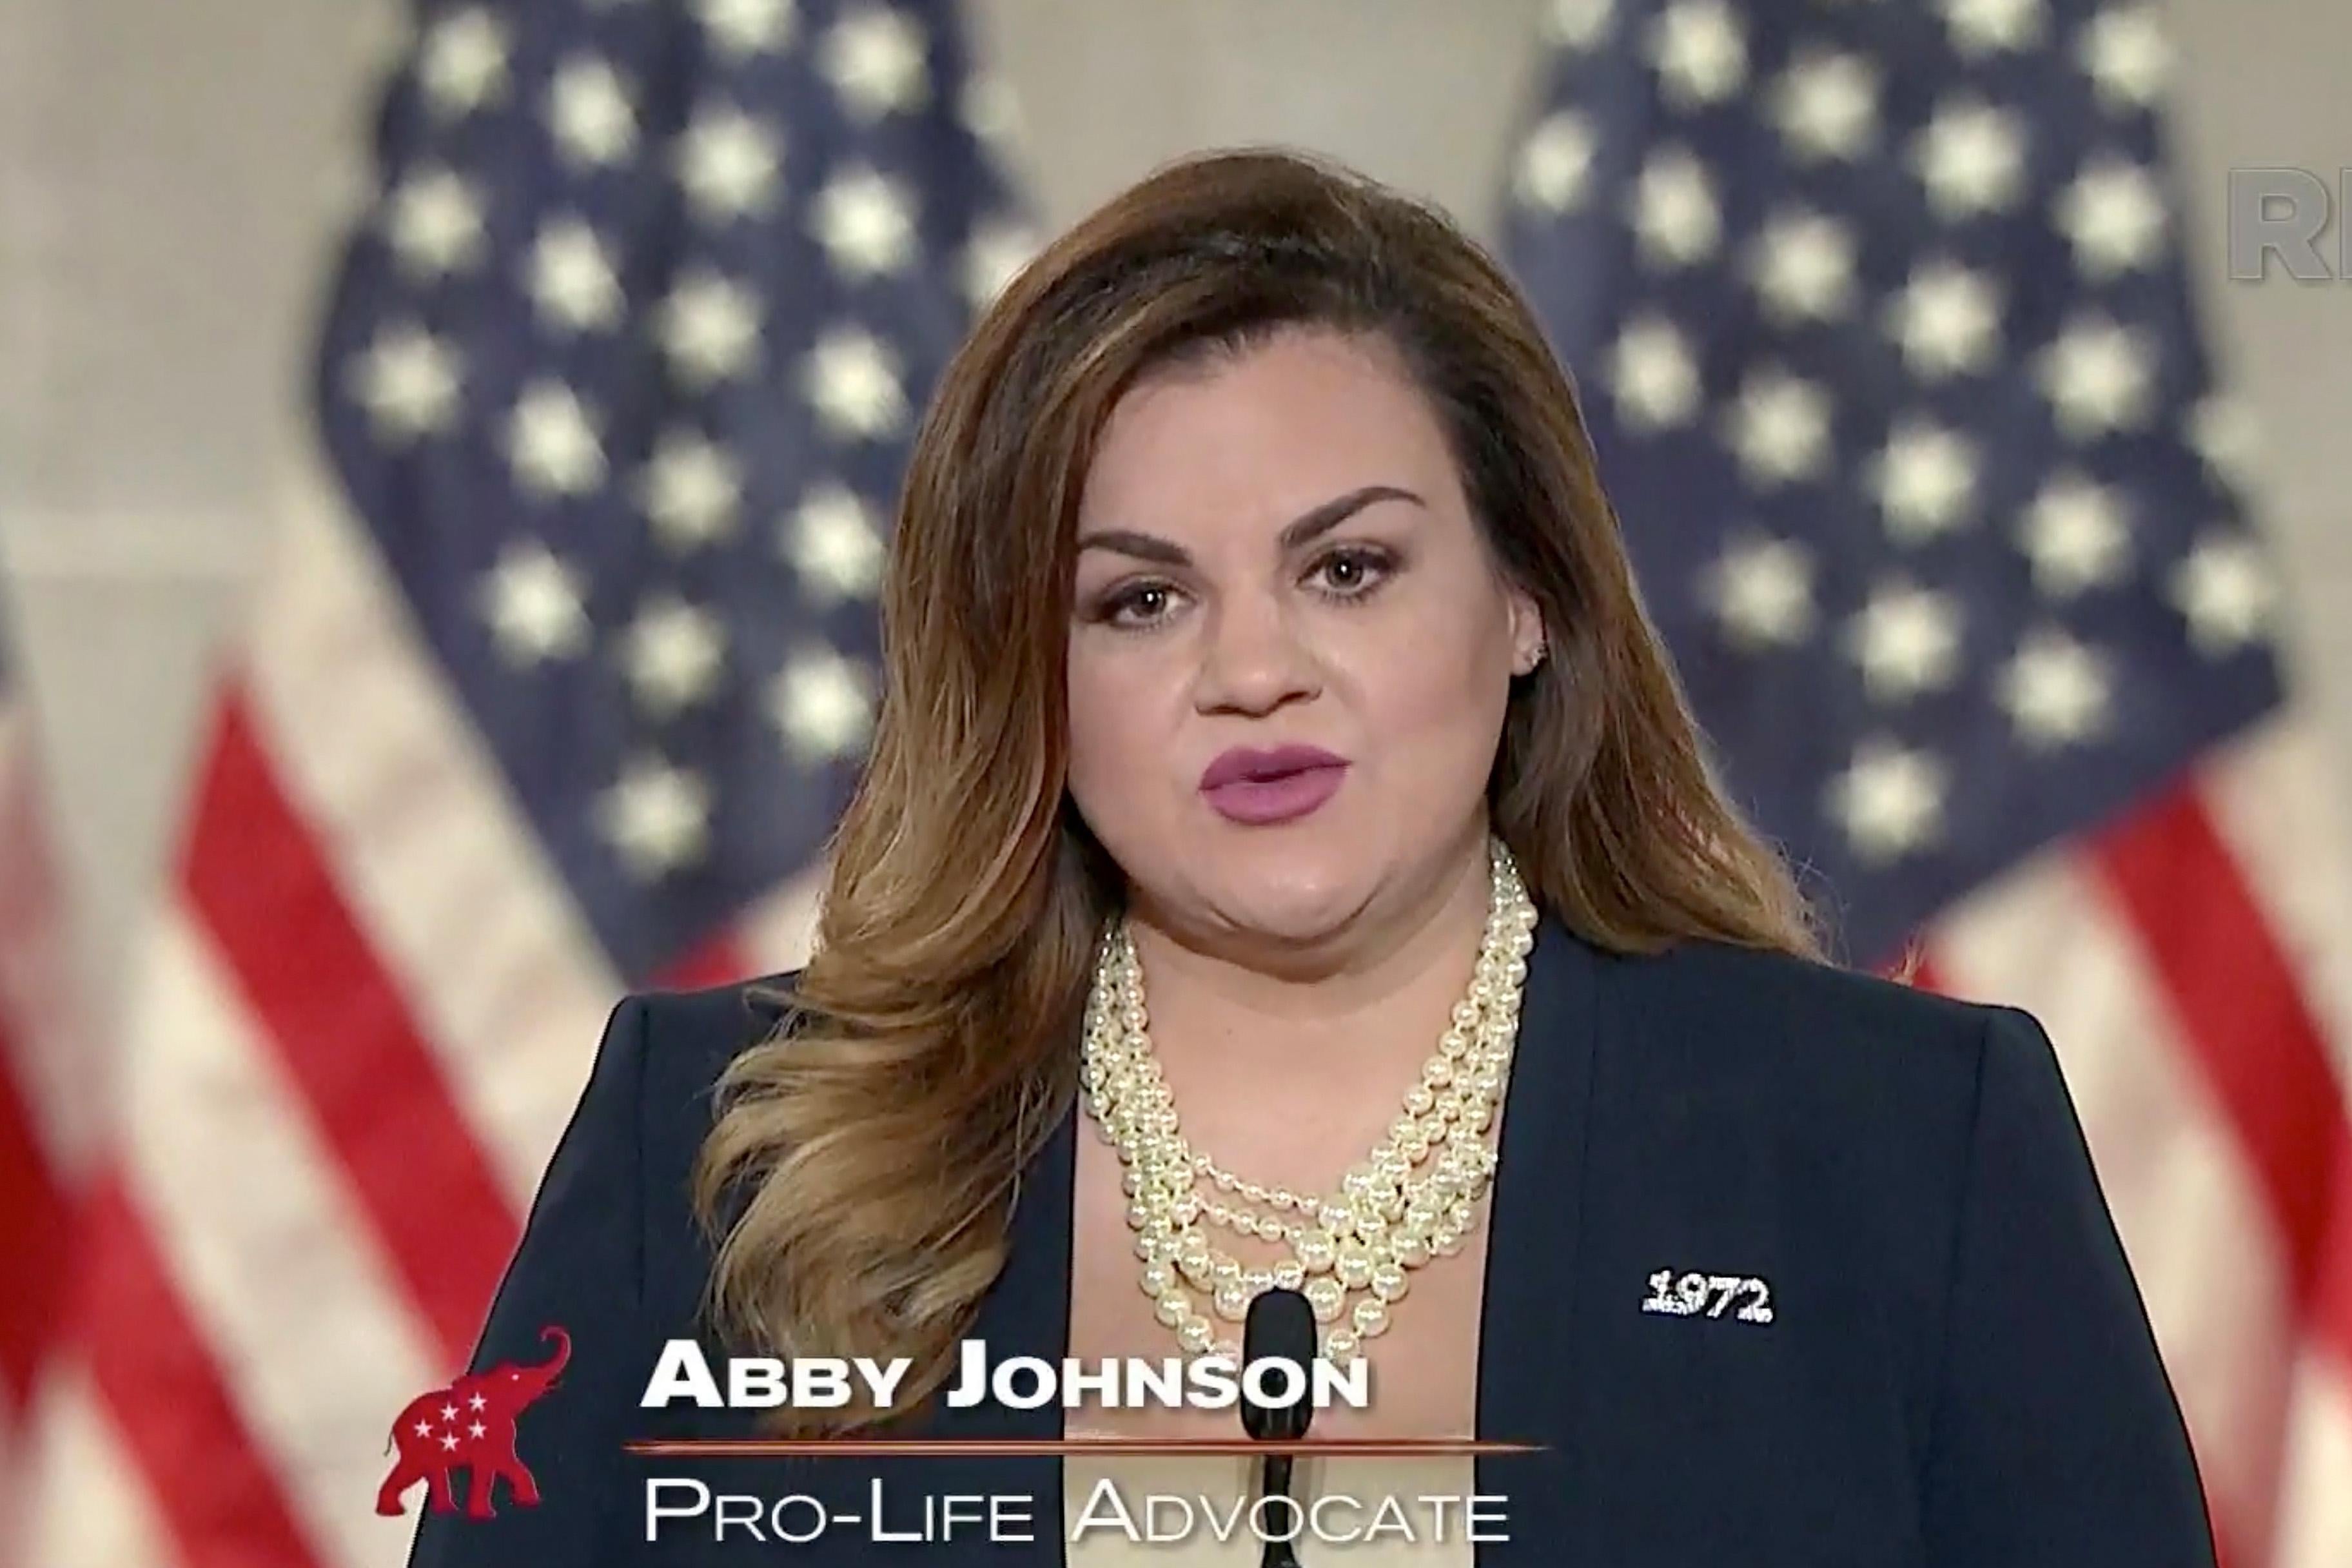 Abby Johnson speaks at a podium, with American flags in the background